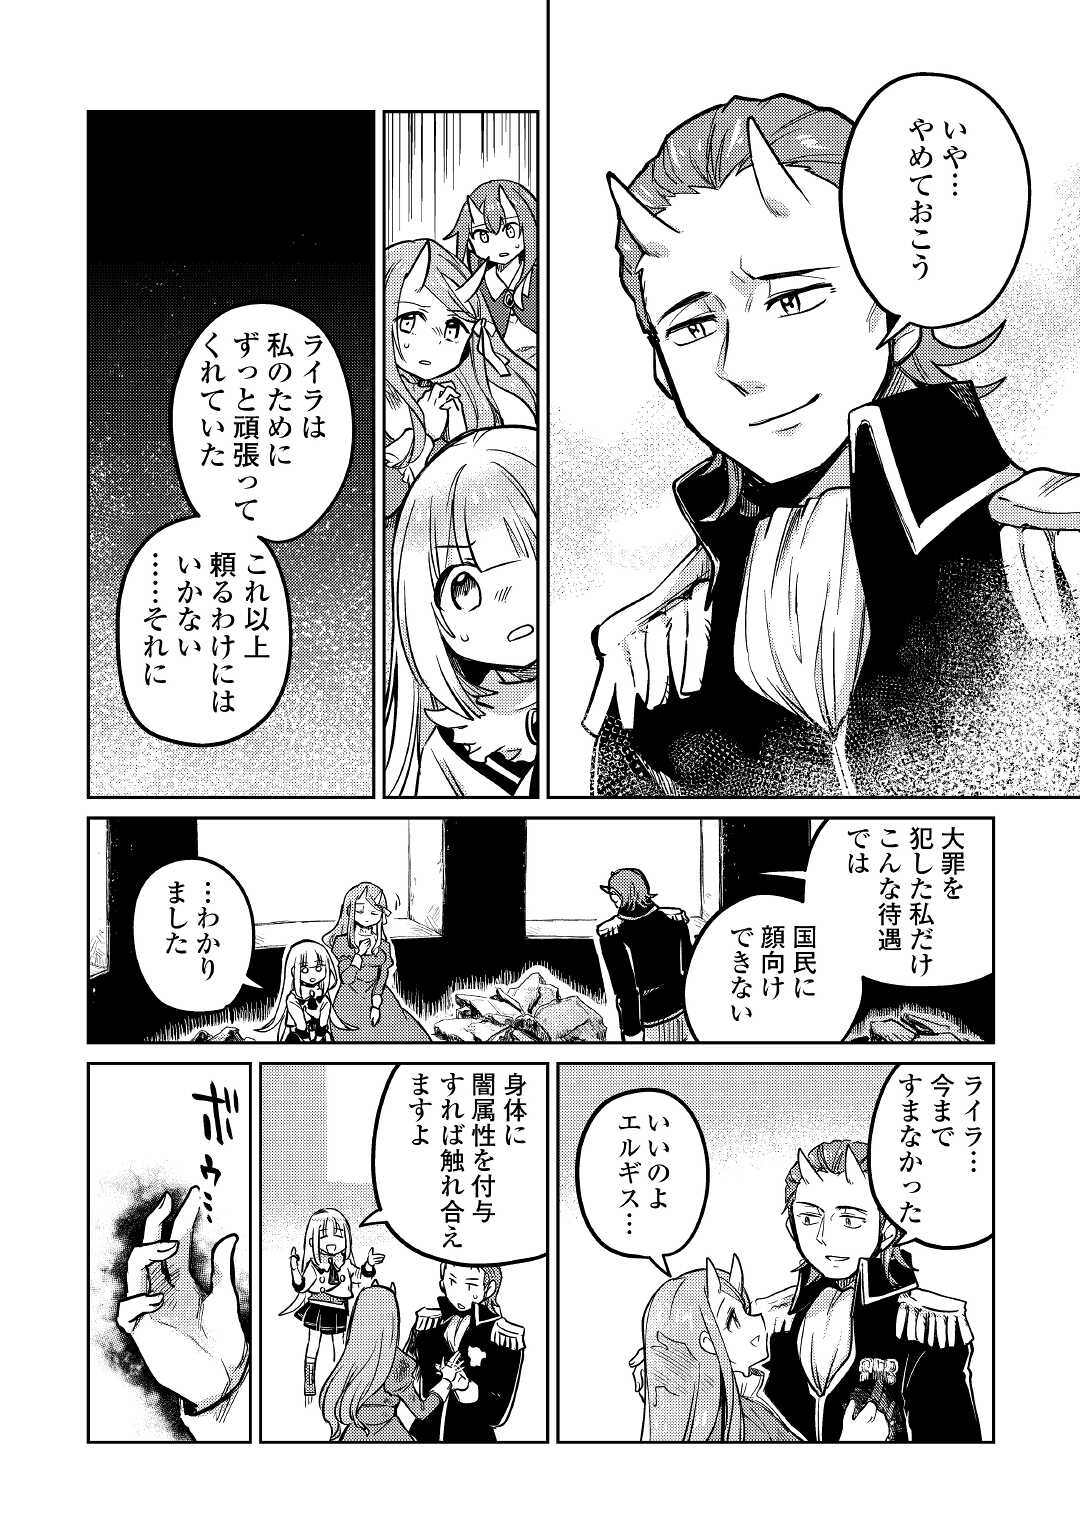 The Former Structural Researcher’s Story of Otherworldly Adventure 第40話 - Page 18